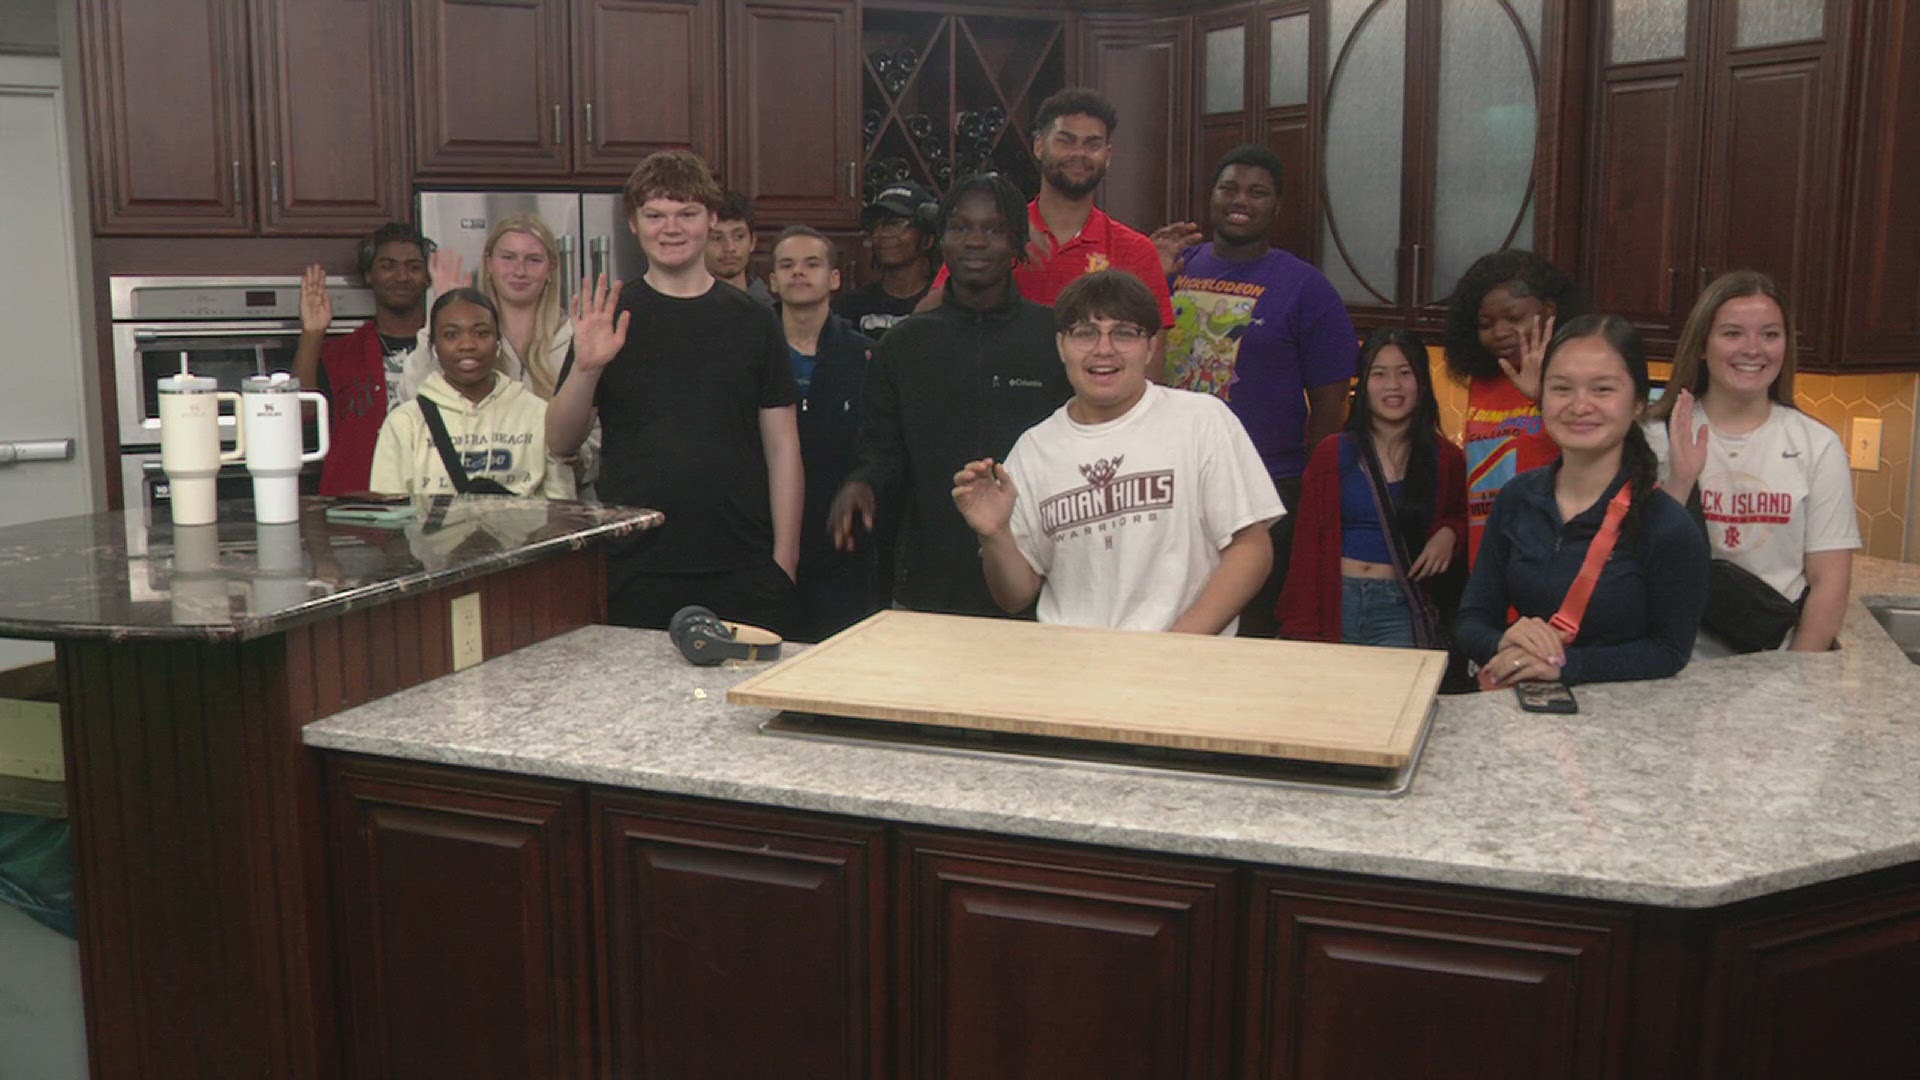 The students, who are taking a current events class, got to learn more about the media and toured News 8's studios.